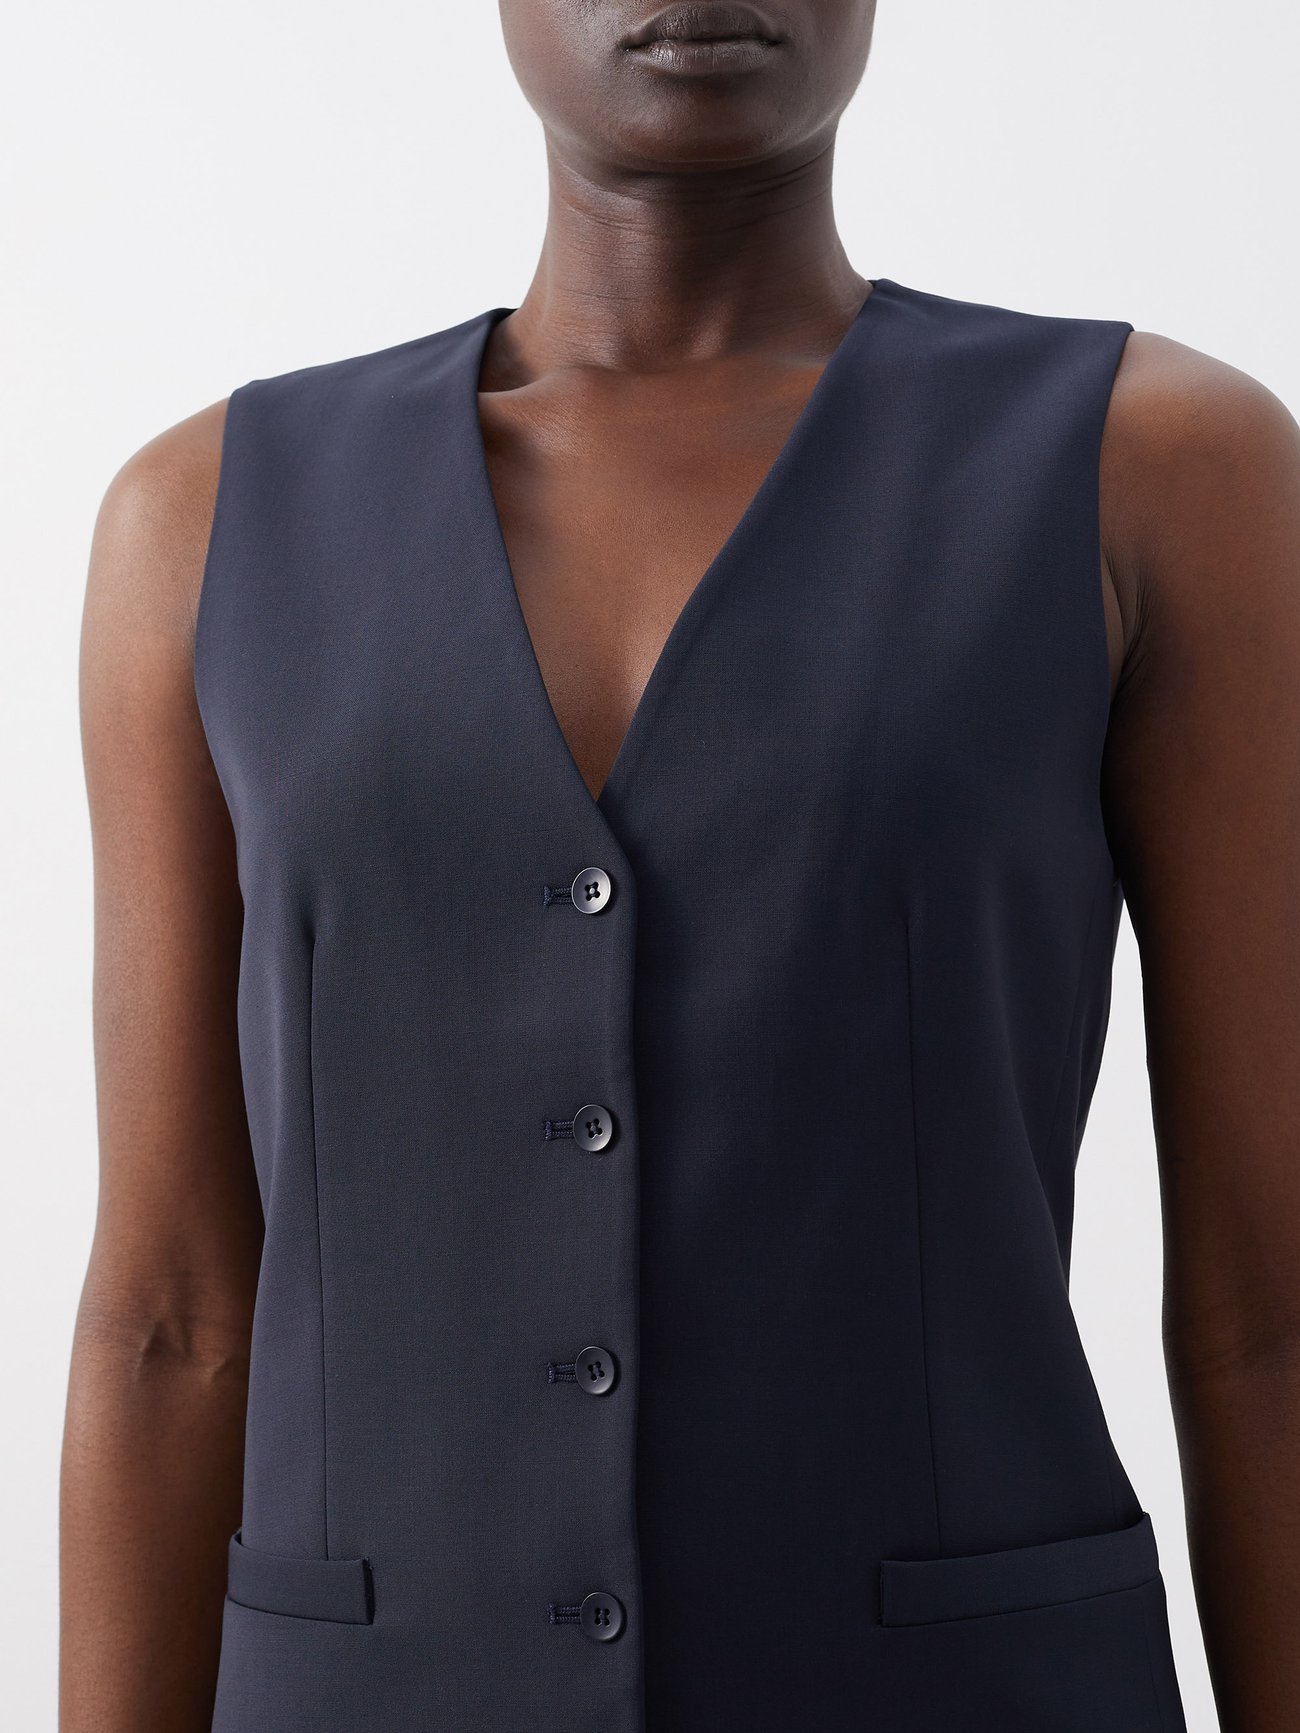 32 Best Suit Vests for Women to Shop and Sport this Spring